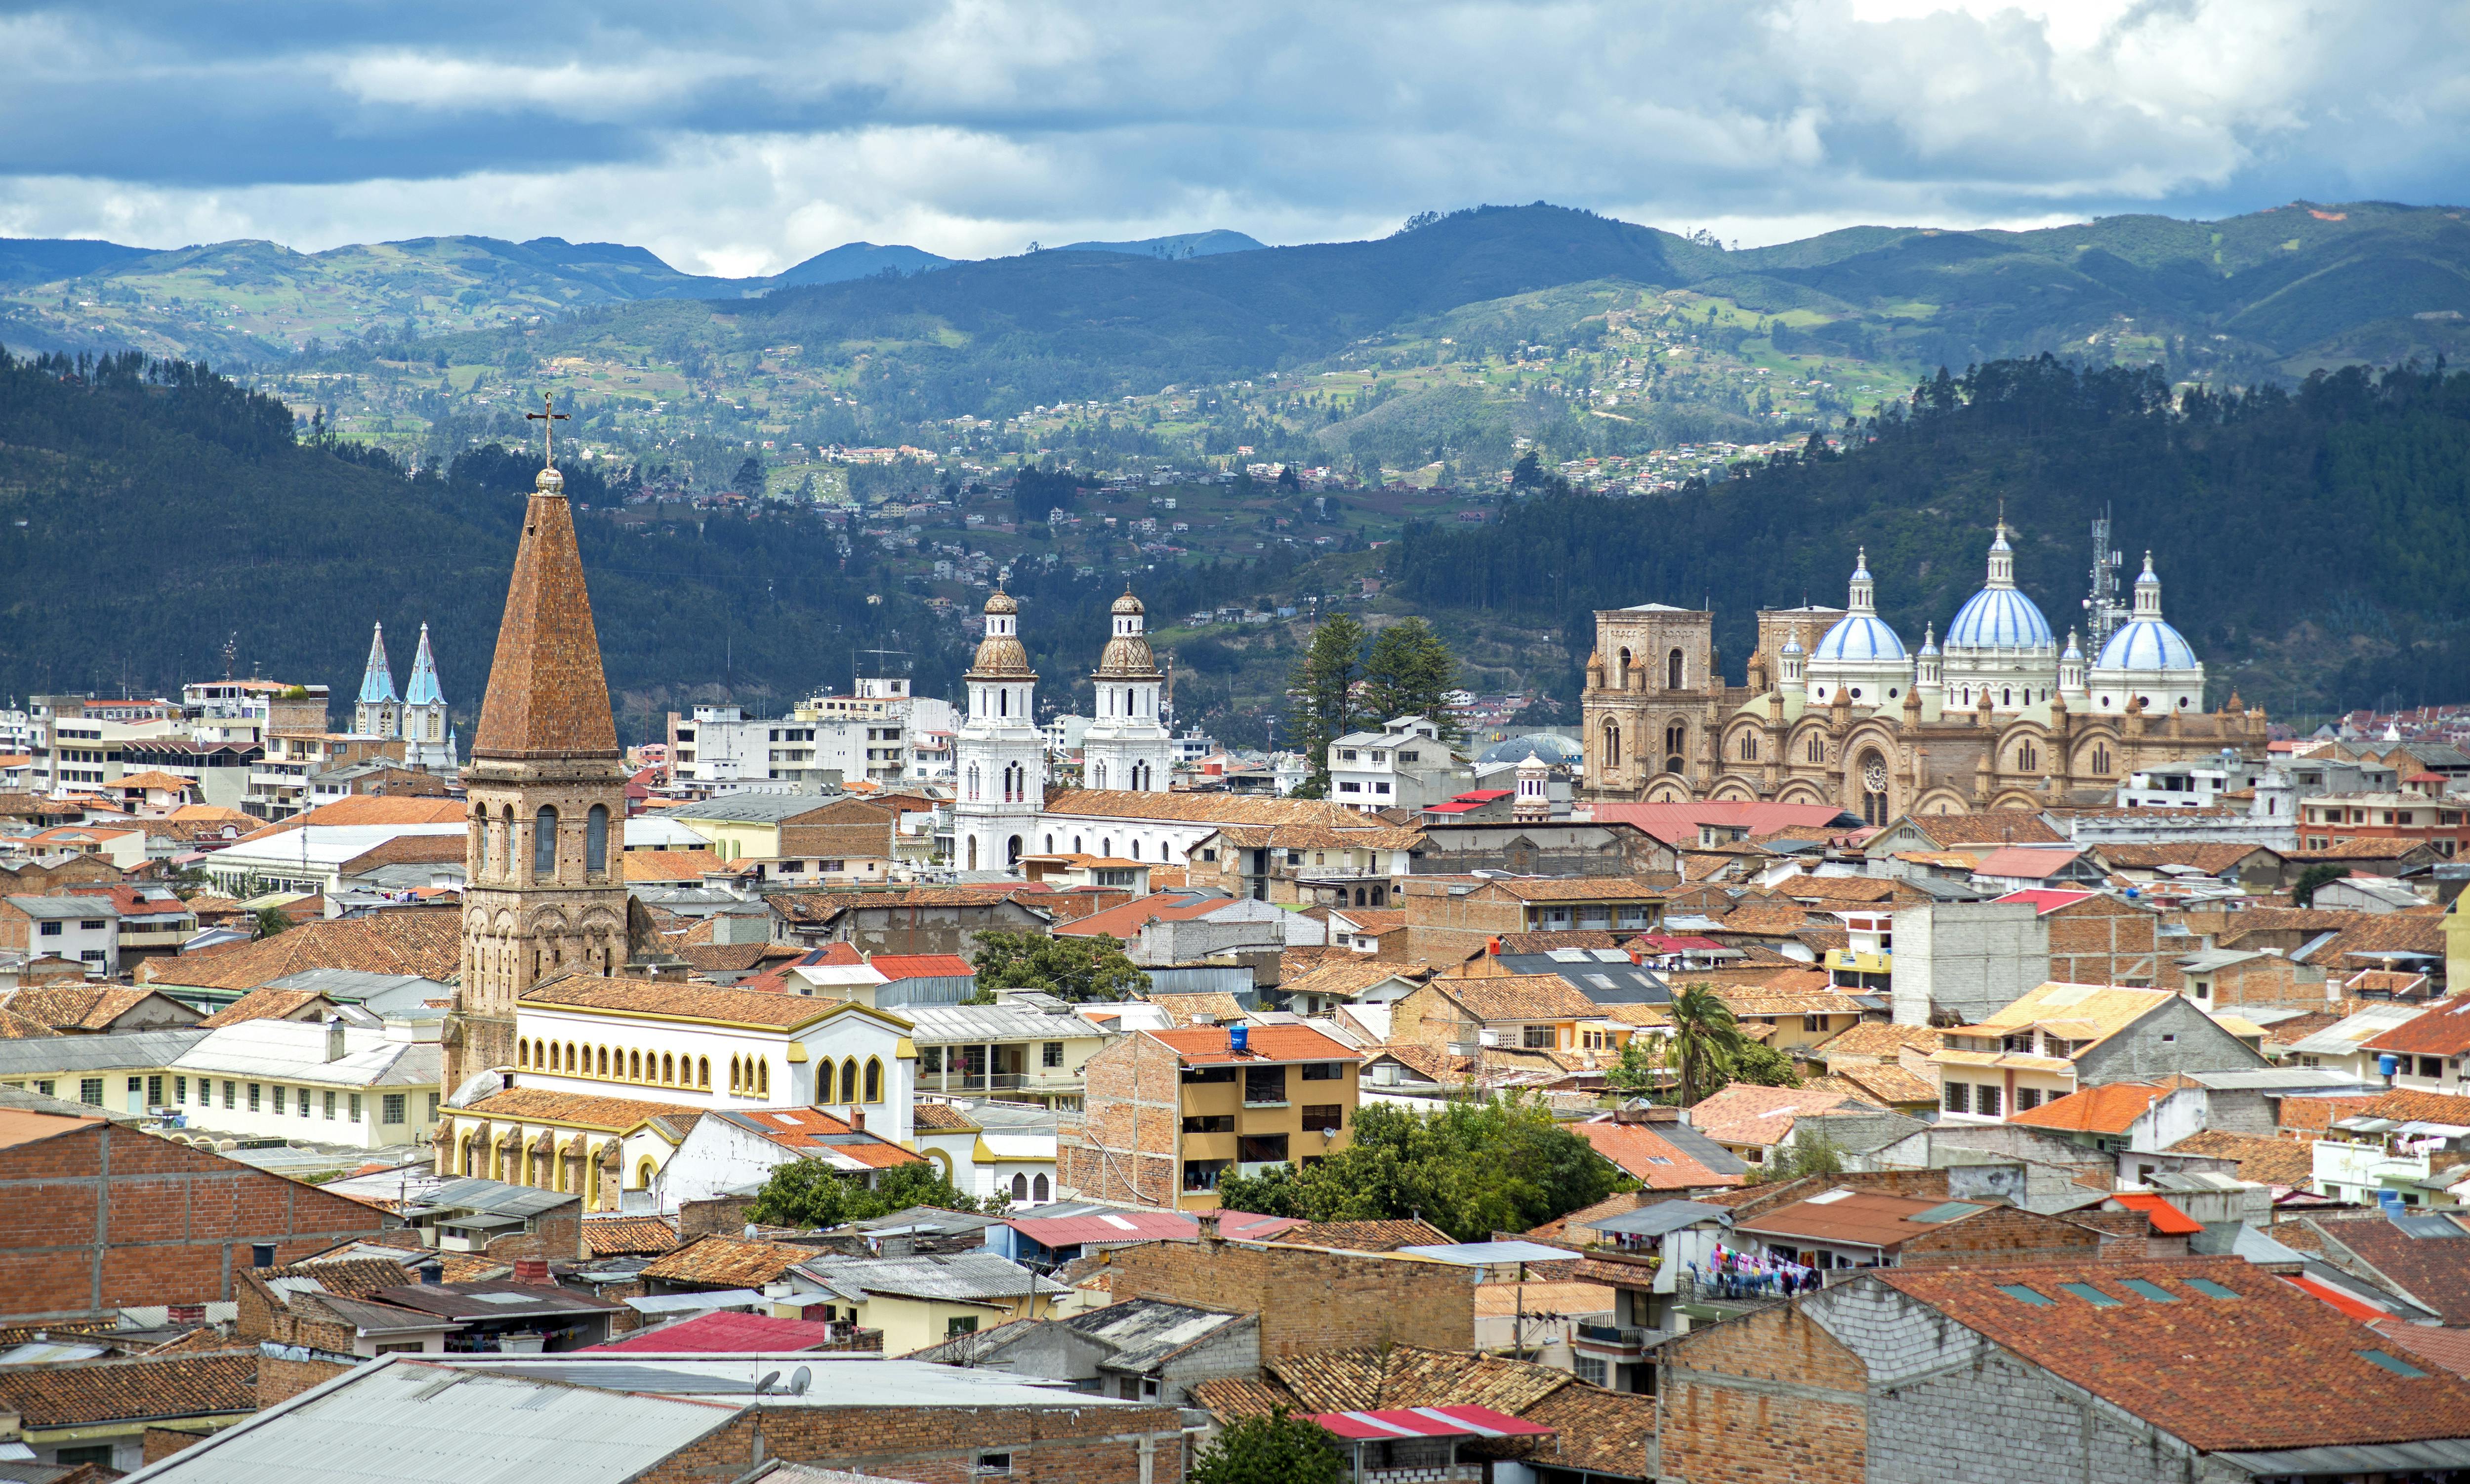 Full Day City Tour in Cuenca